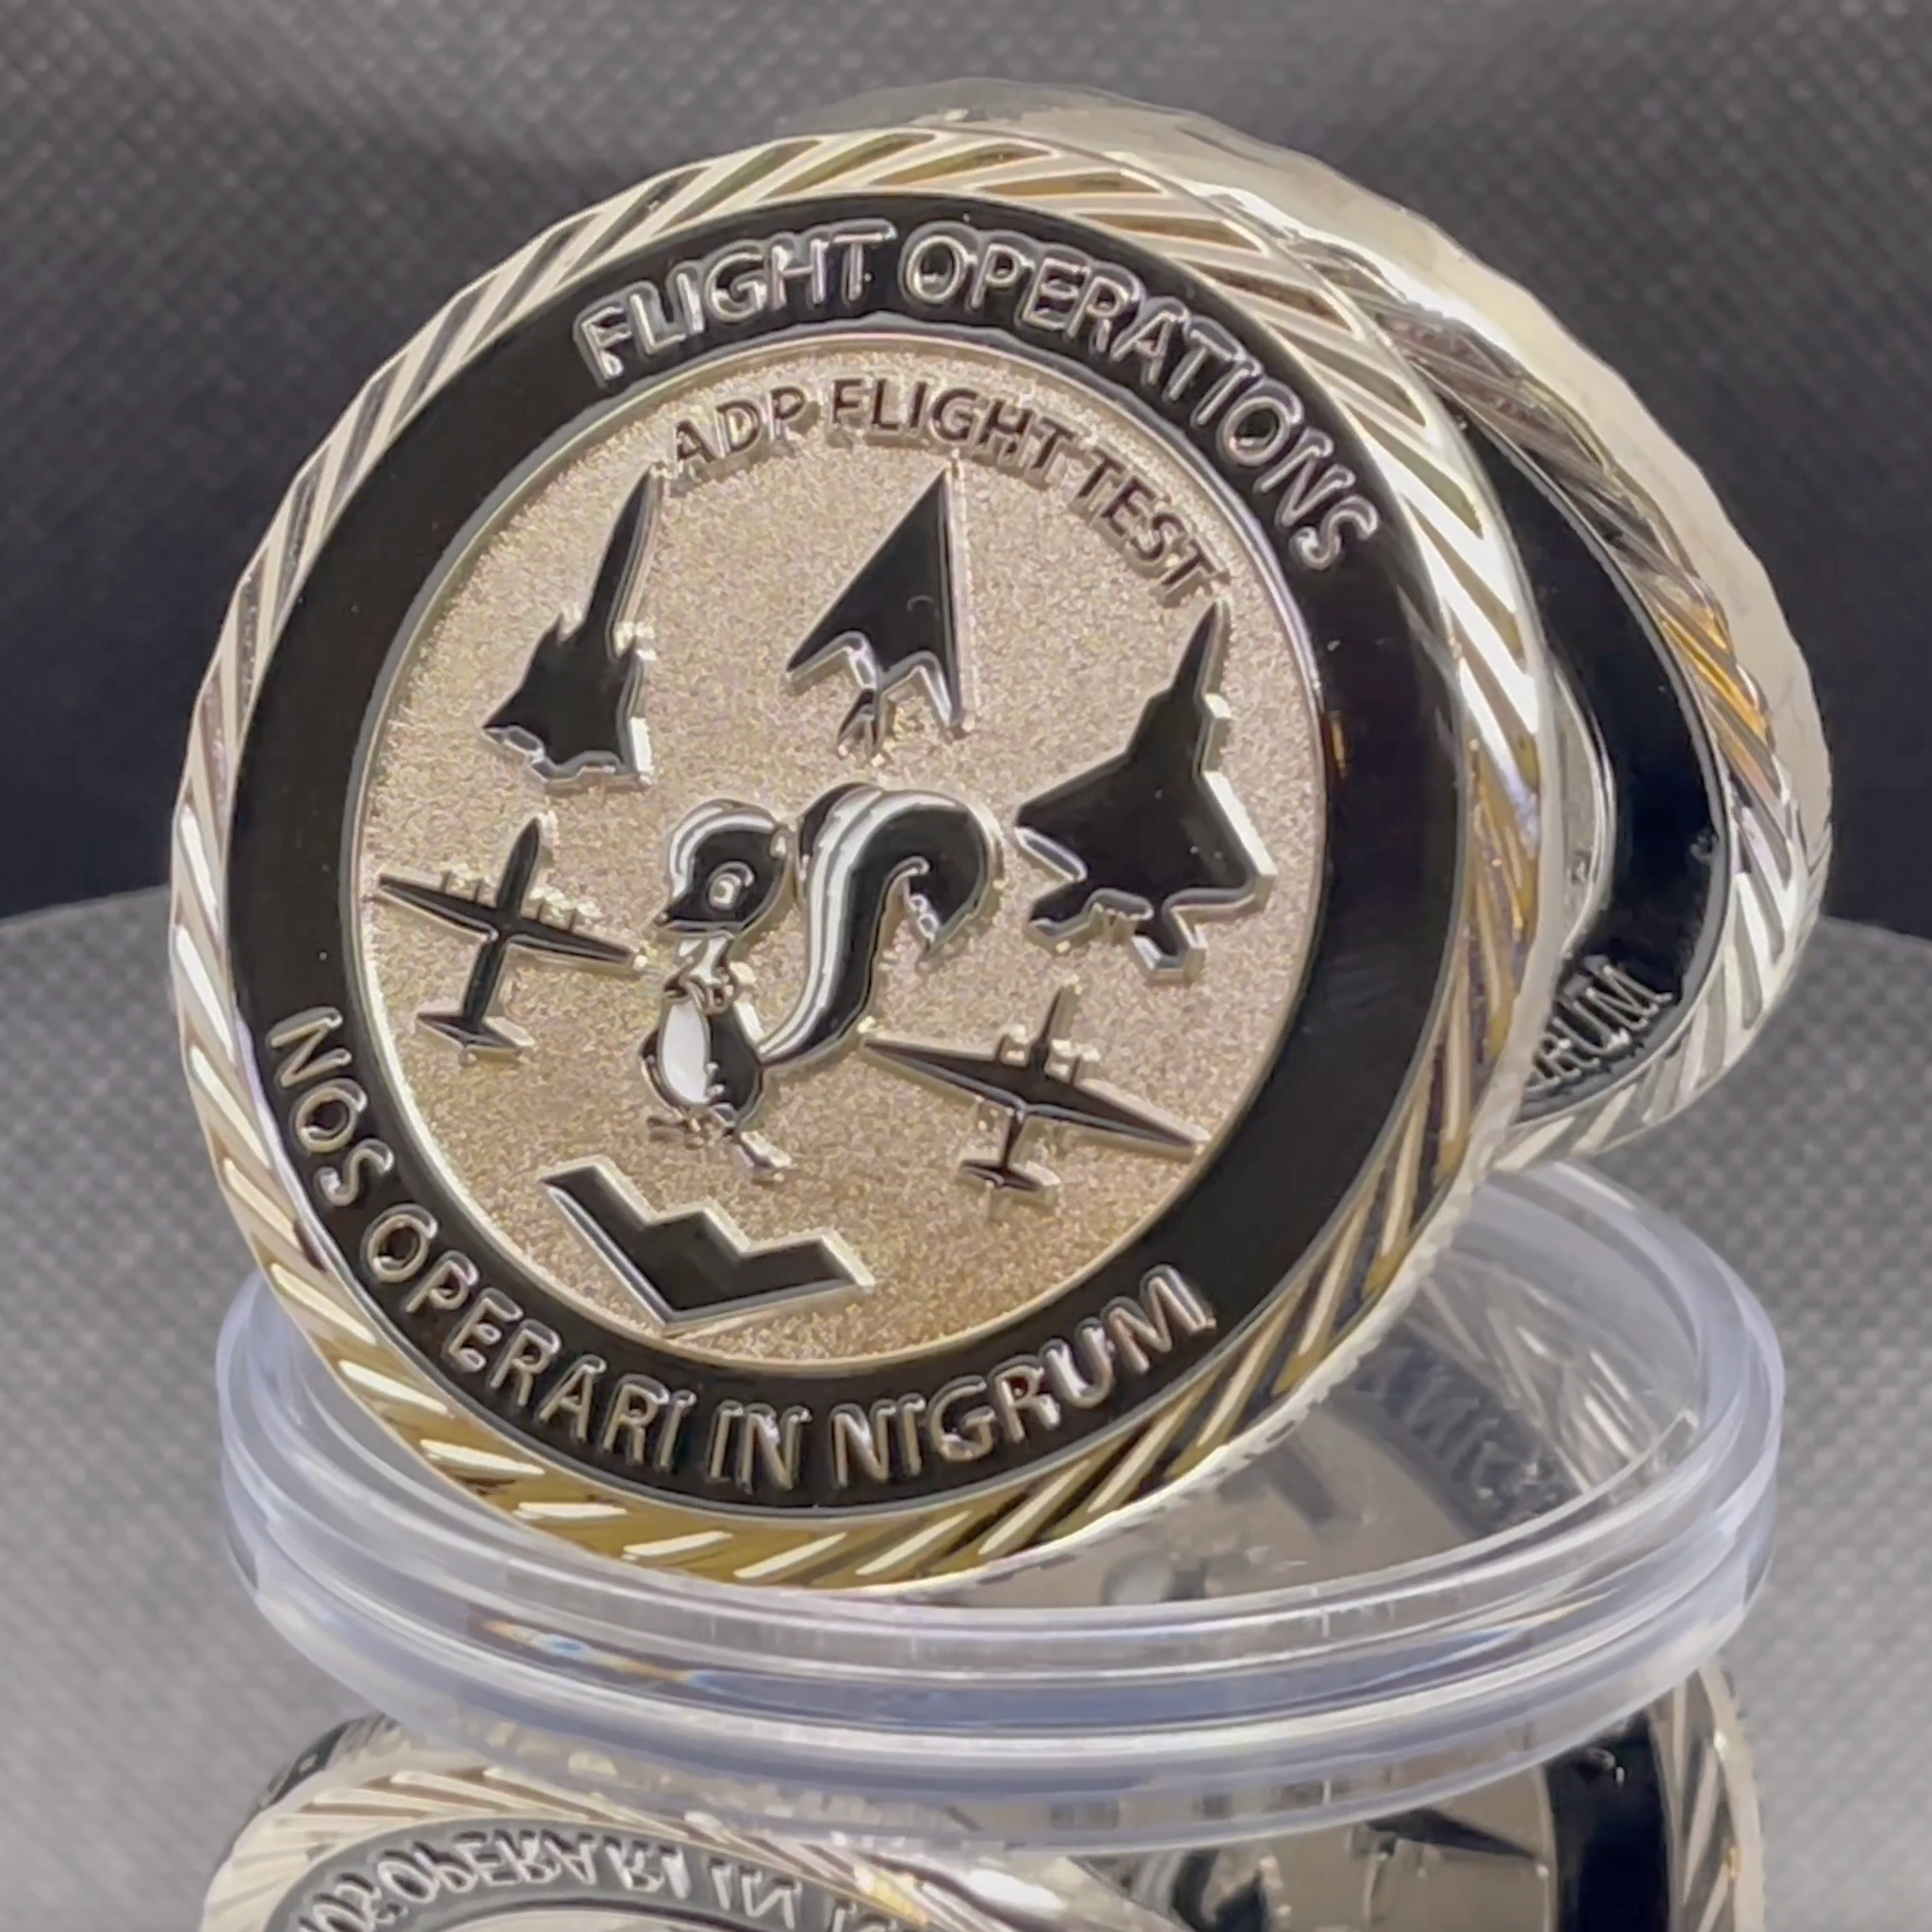 Skunk Works Collector's Coin - Premium Numbers - Limited Edition